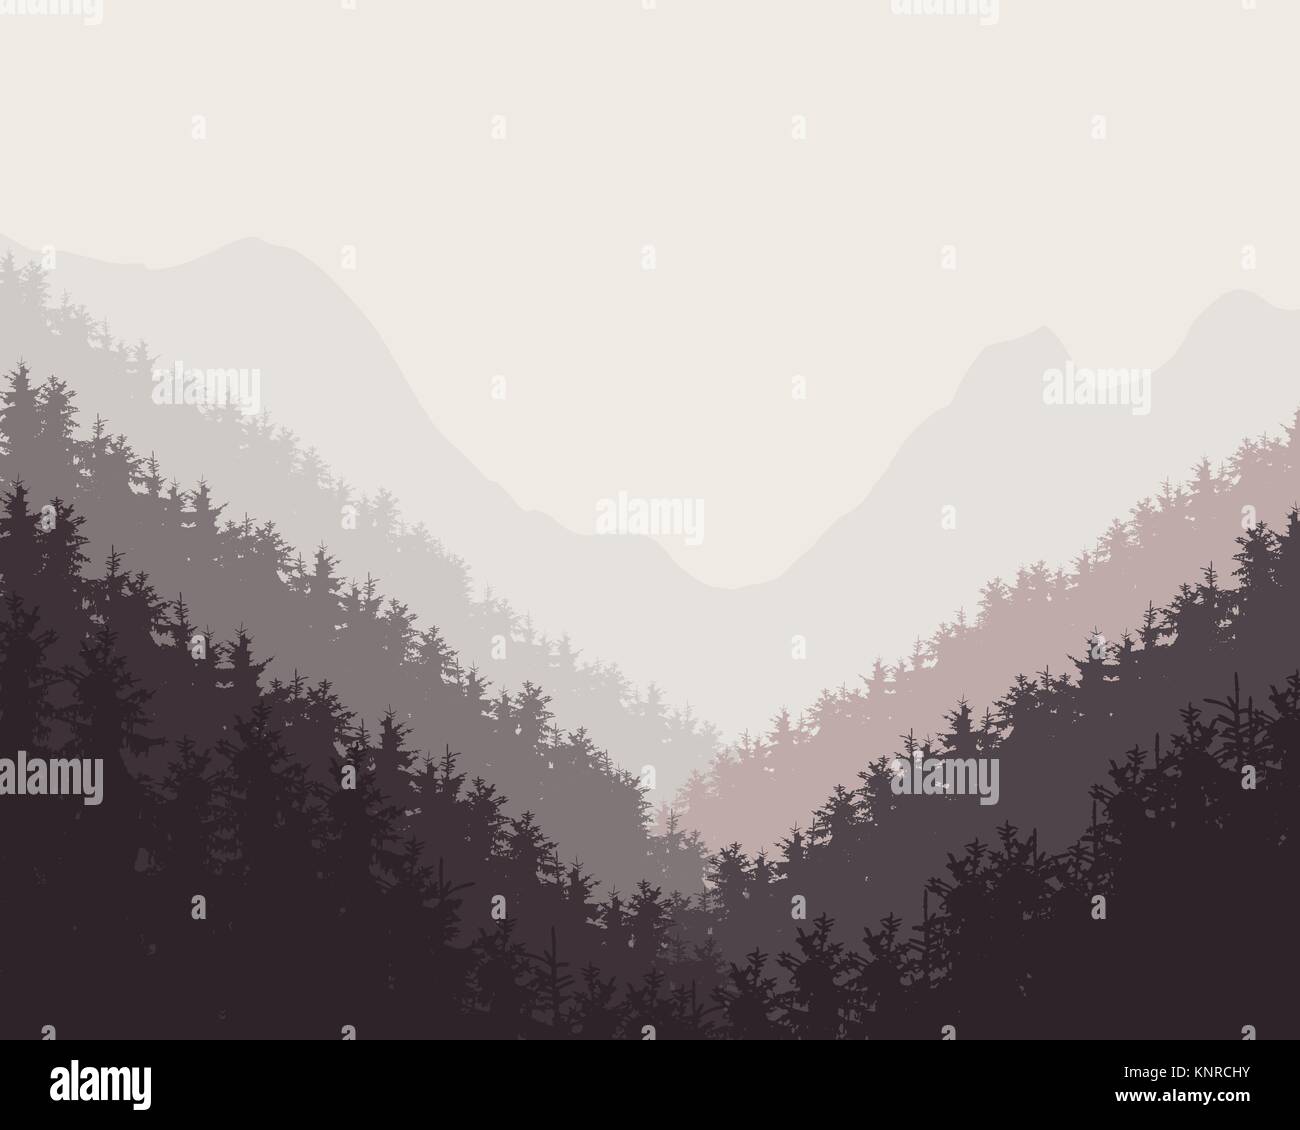 Vector retro illustration of a winter forest with snow and hazy backgrounds Stock Vector